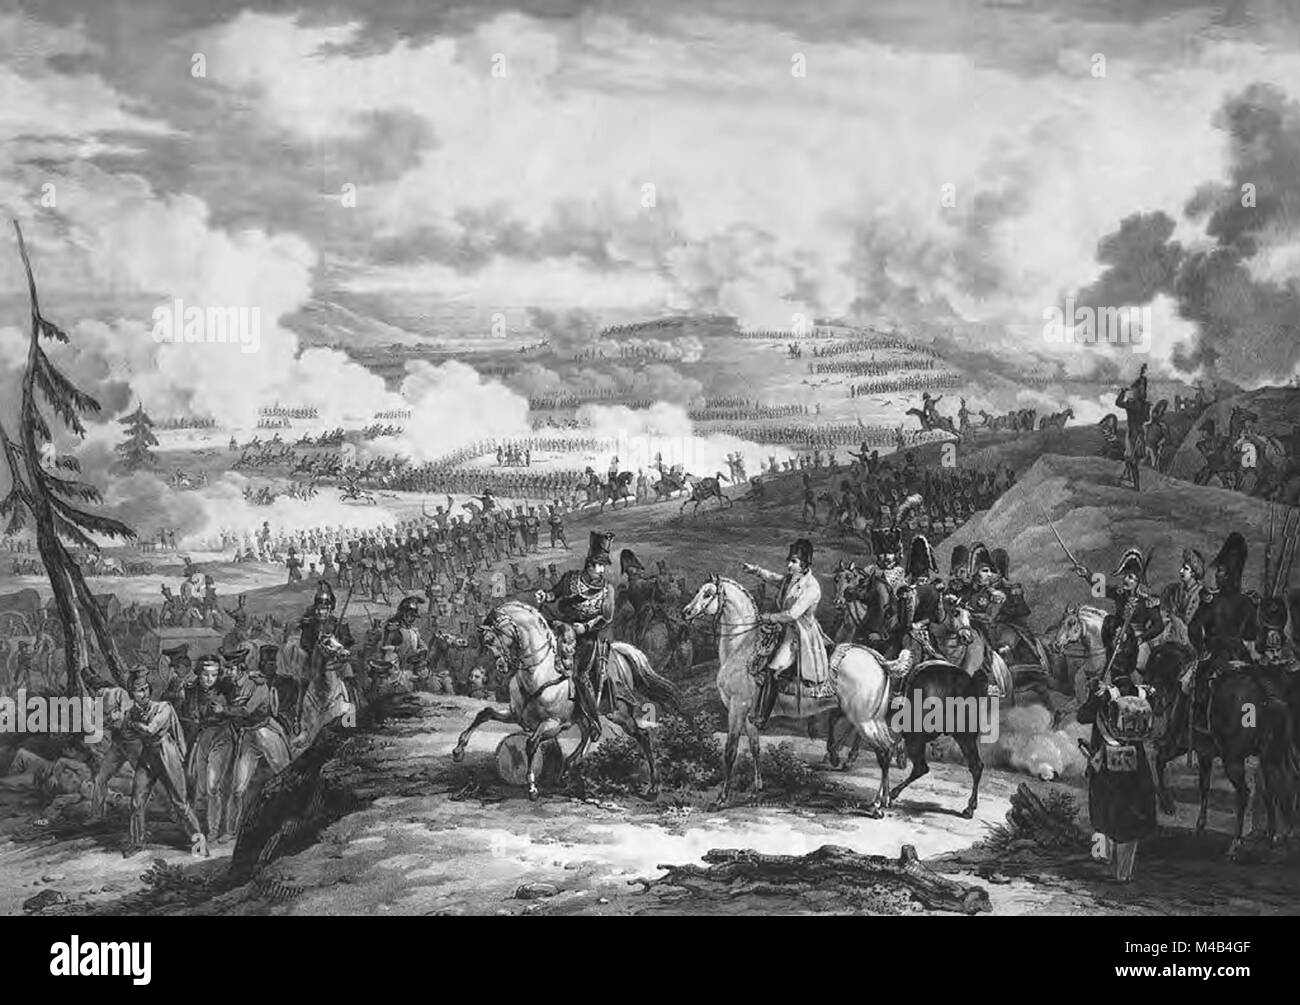 The Battle of Borodino see here in 19th century engraving by unknown artist.  The Battle of Borodino was a battle fought on 7 September 1812 in the Napoleonic Wars during the French invasion of Russia. It was fought between the armies of Napoleon, Mikhail Kutuzov, Pyotr Bagration and Michael Andreas Barclay de Tolly. Stock Photo